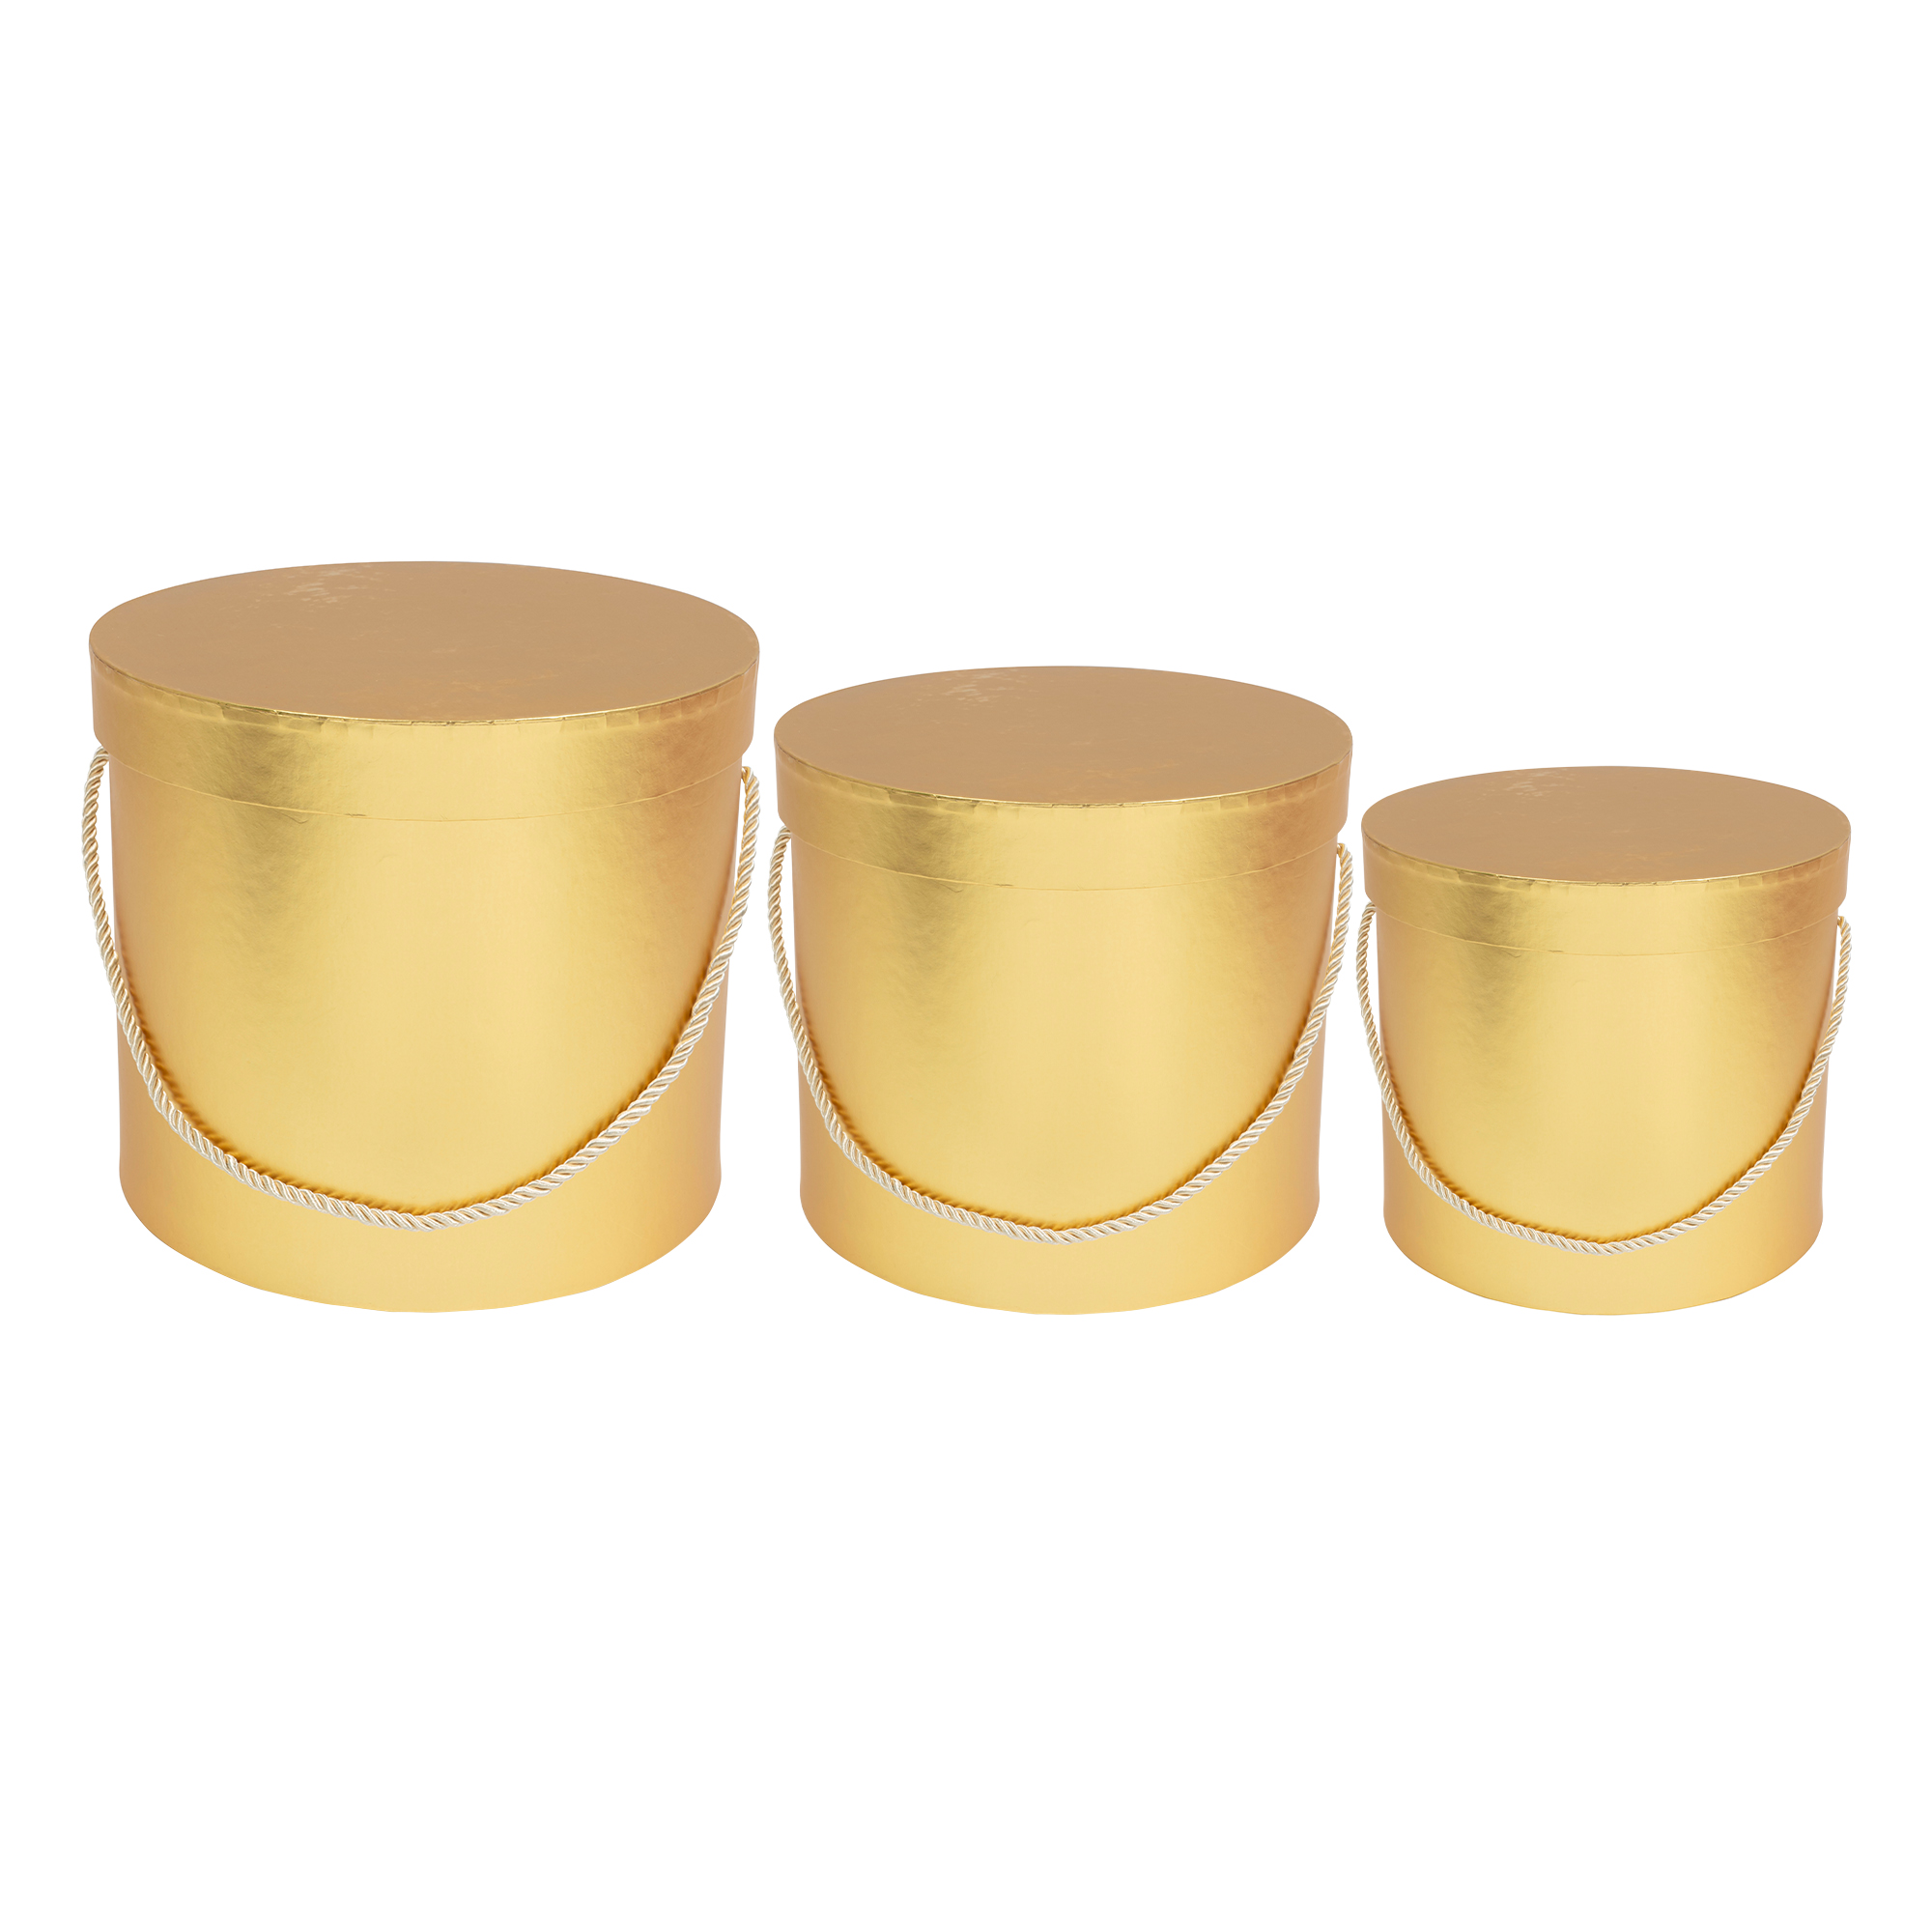 Nested Floral Boxes 3pc/set - Gold